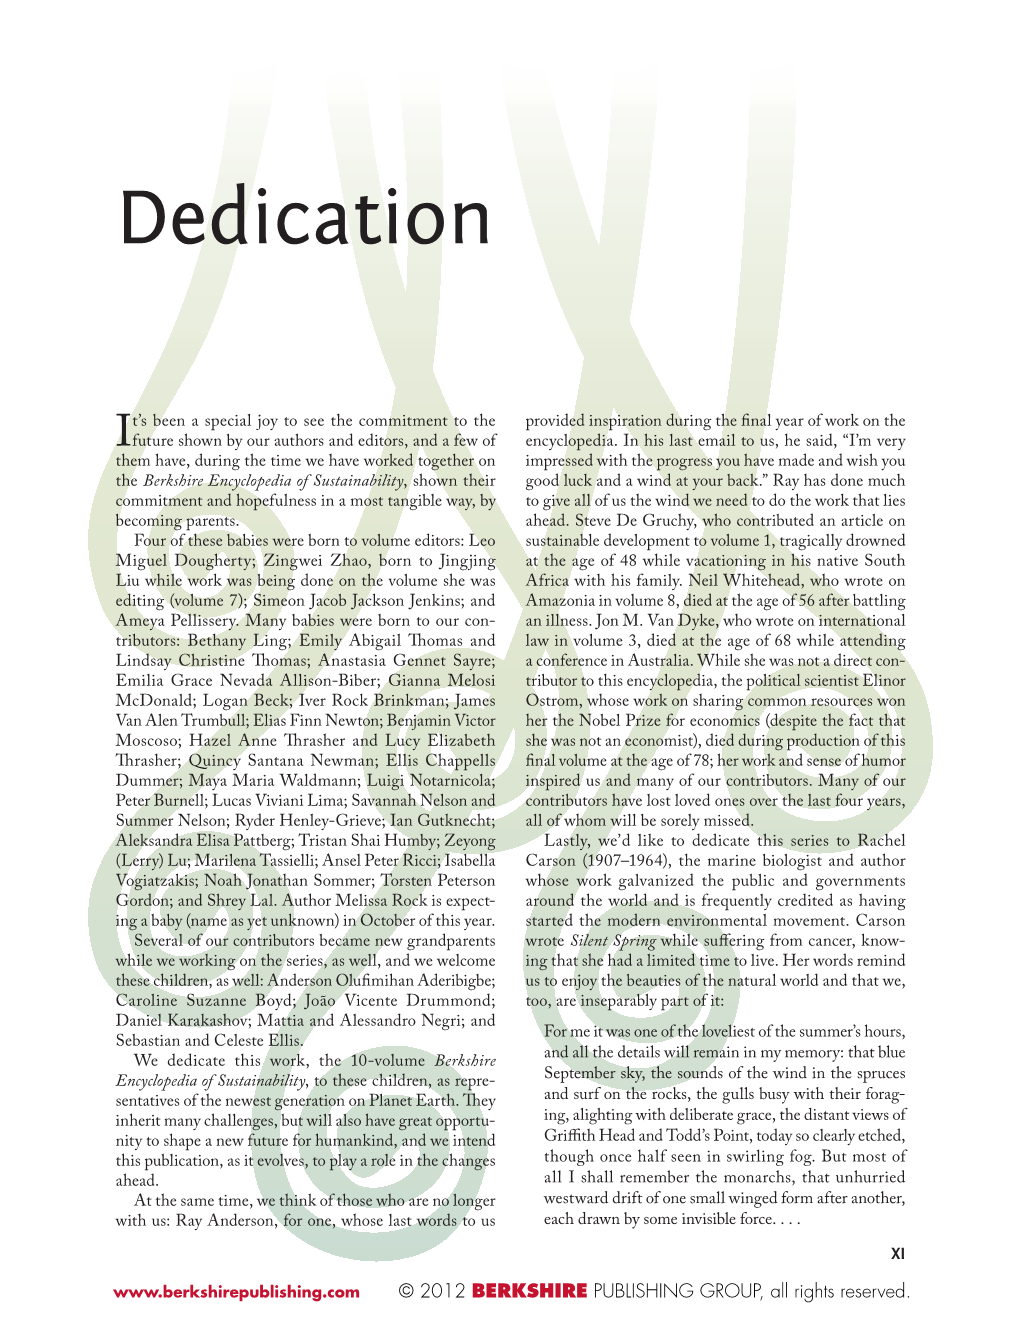 Dedication and Introduction